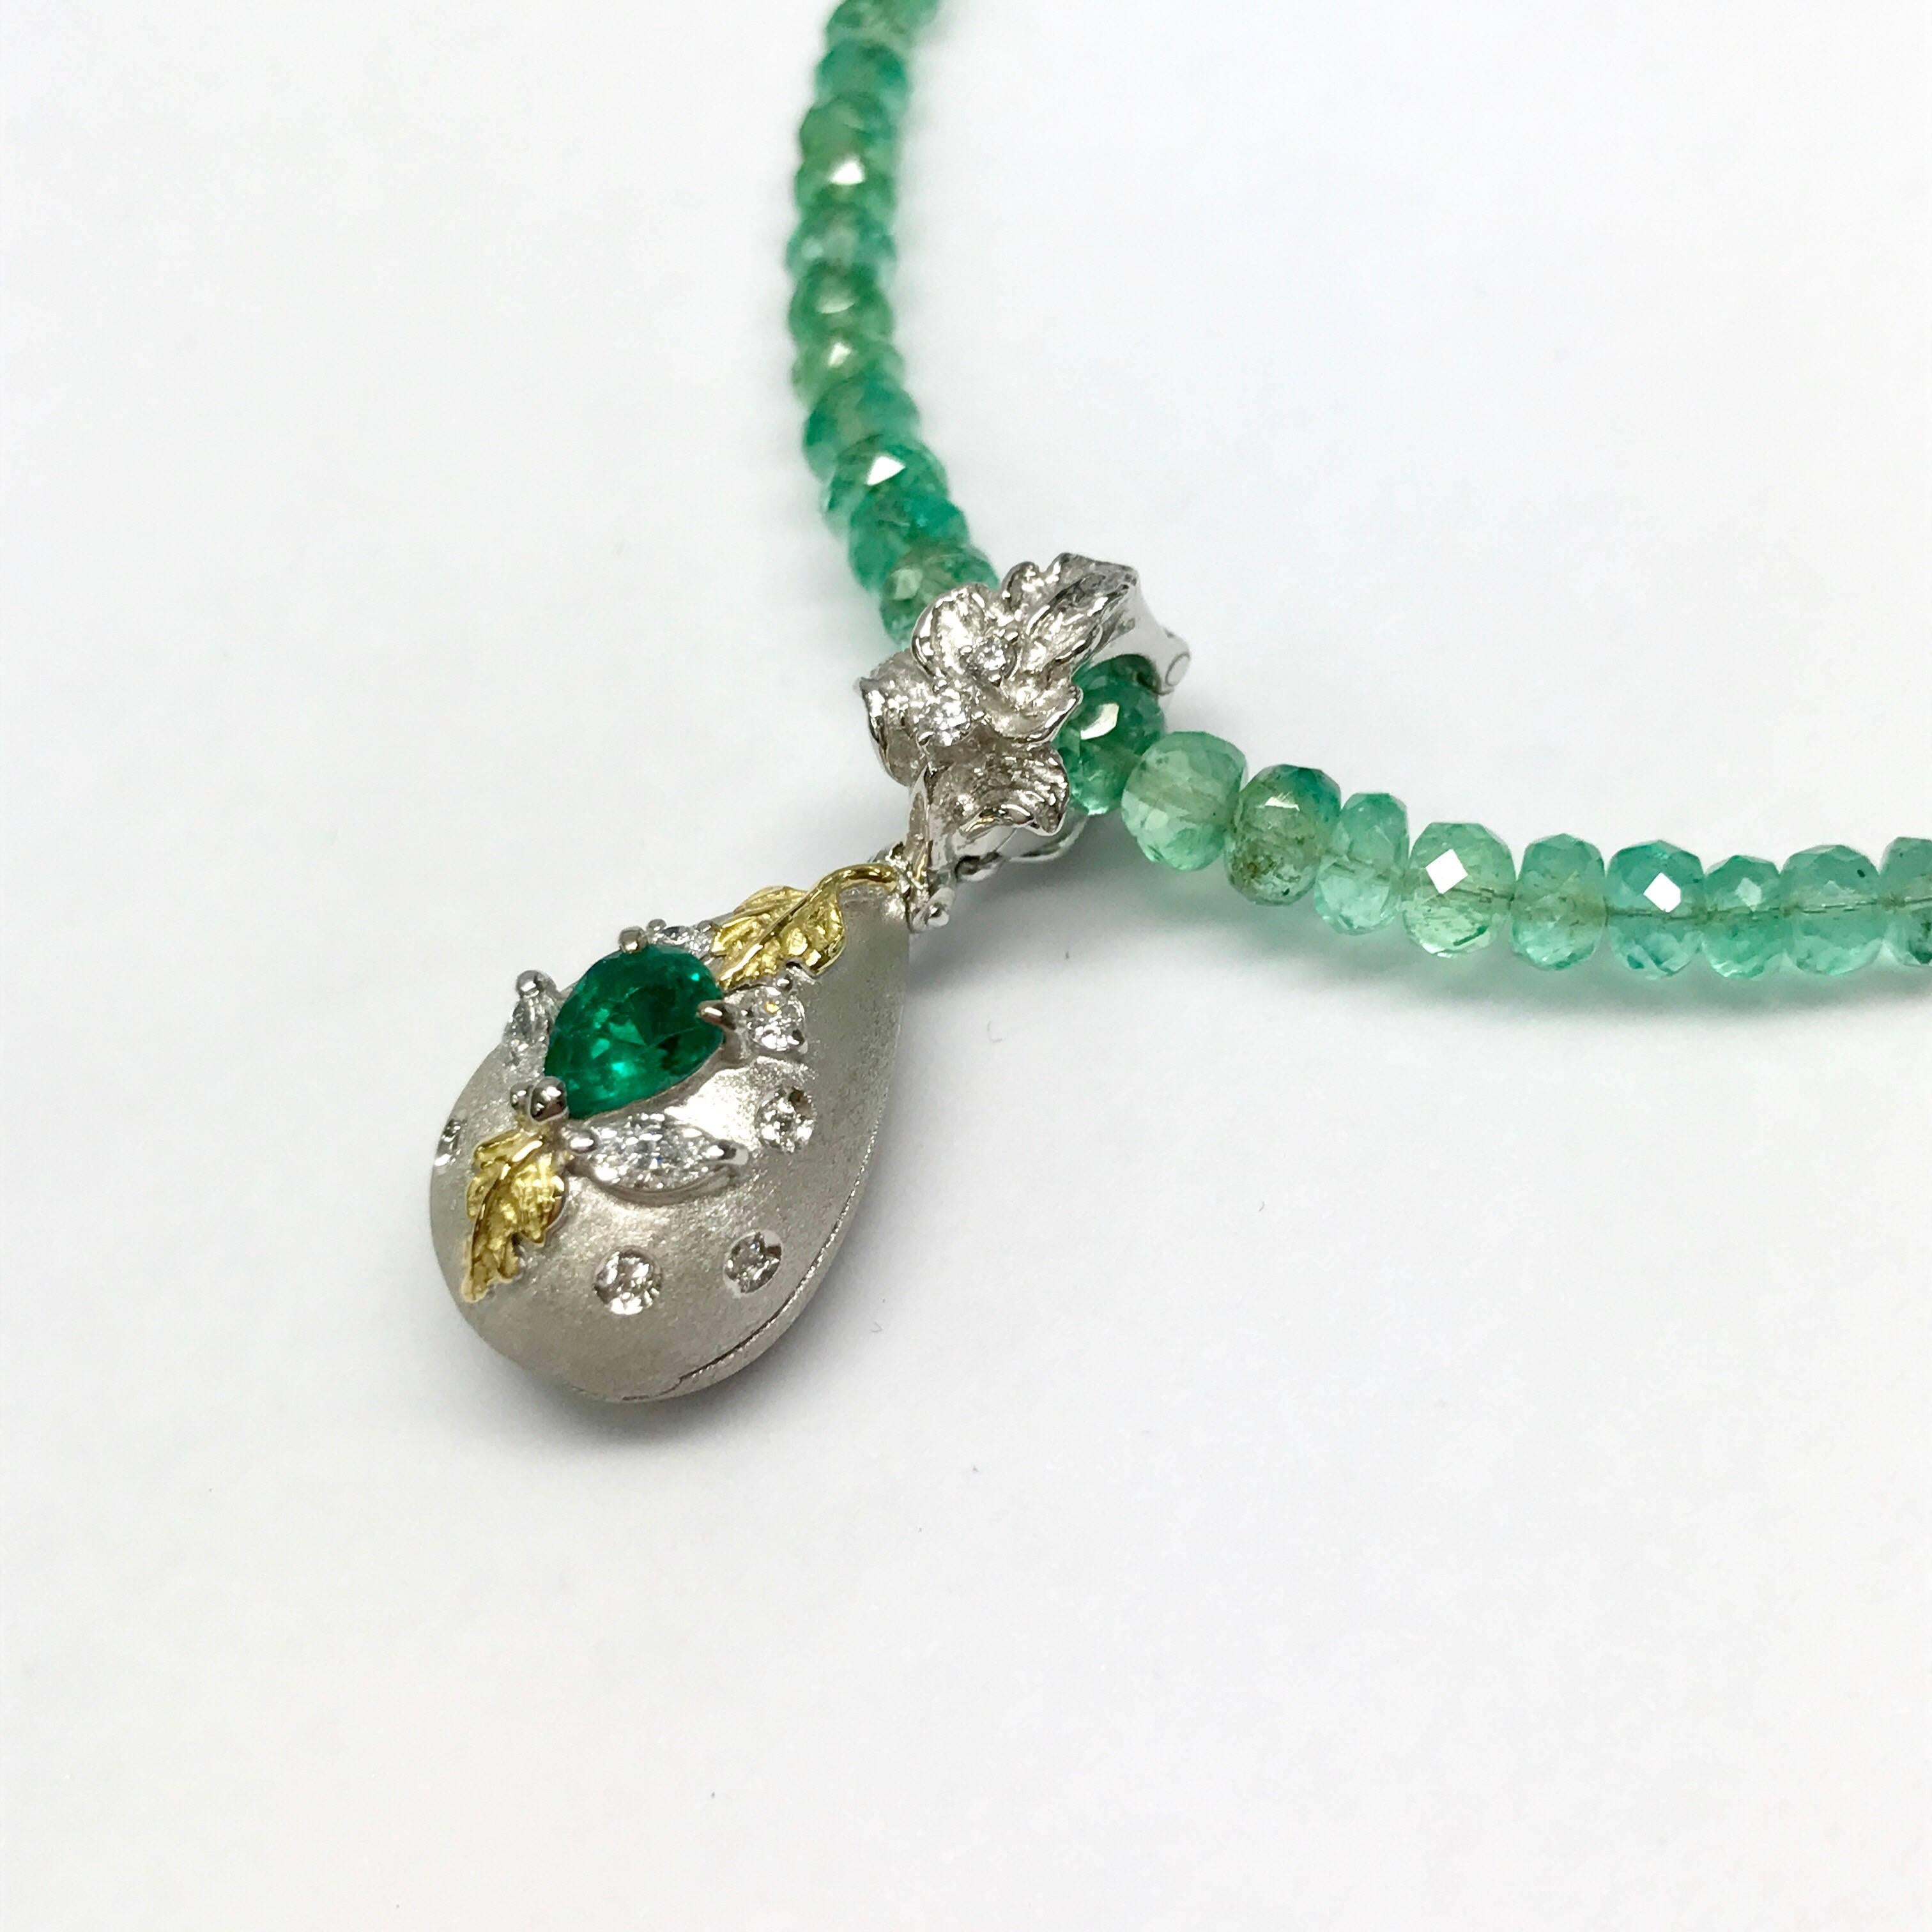 All buyers outside of Japan will receive -10% tax exemption from the list price. 
Please inquire for details.
Emerald : 0.38ct / Diamonds : 0.26ct
Approximate Size of the center stone : L6mm W4.5mm
Beads Necklace : Emeralds 32ct / K14WG (45cm)